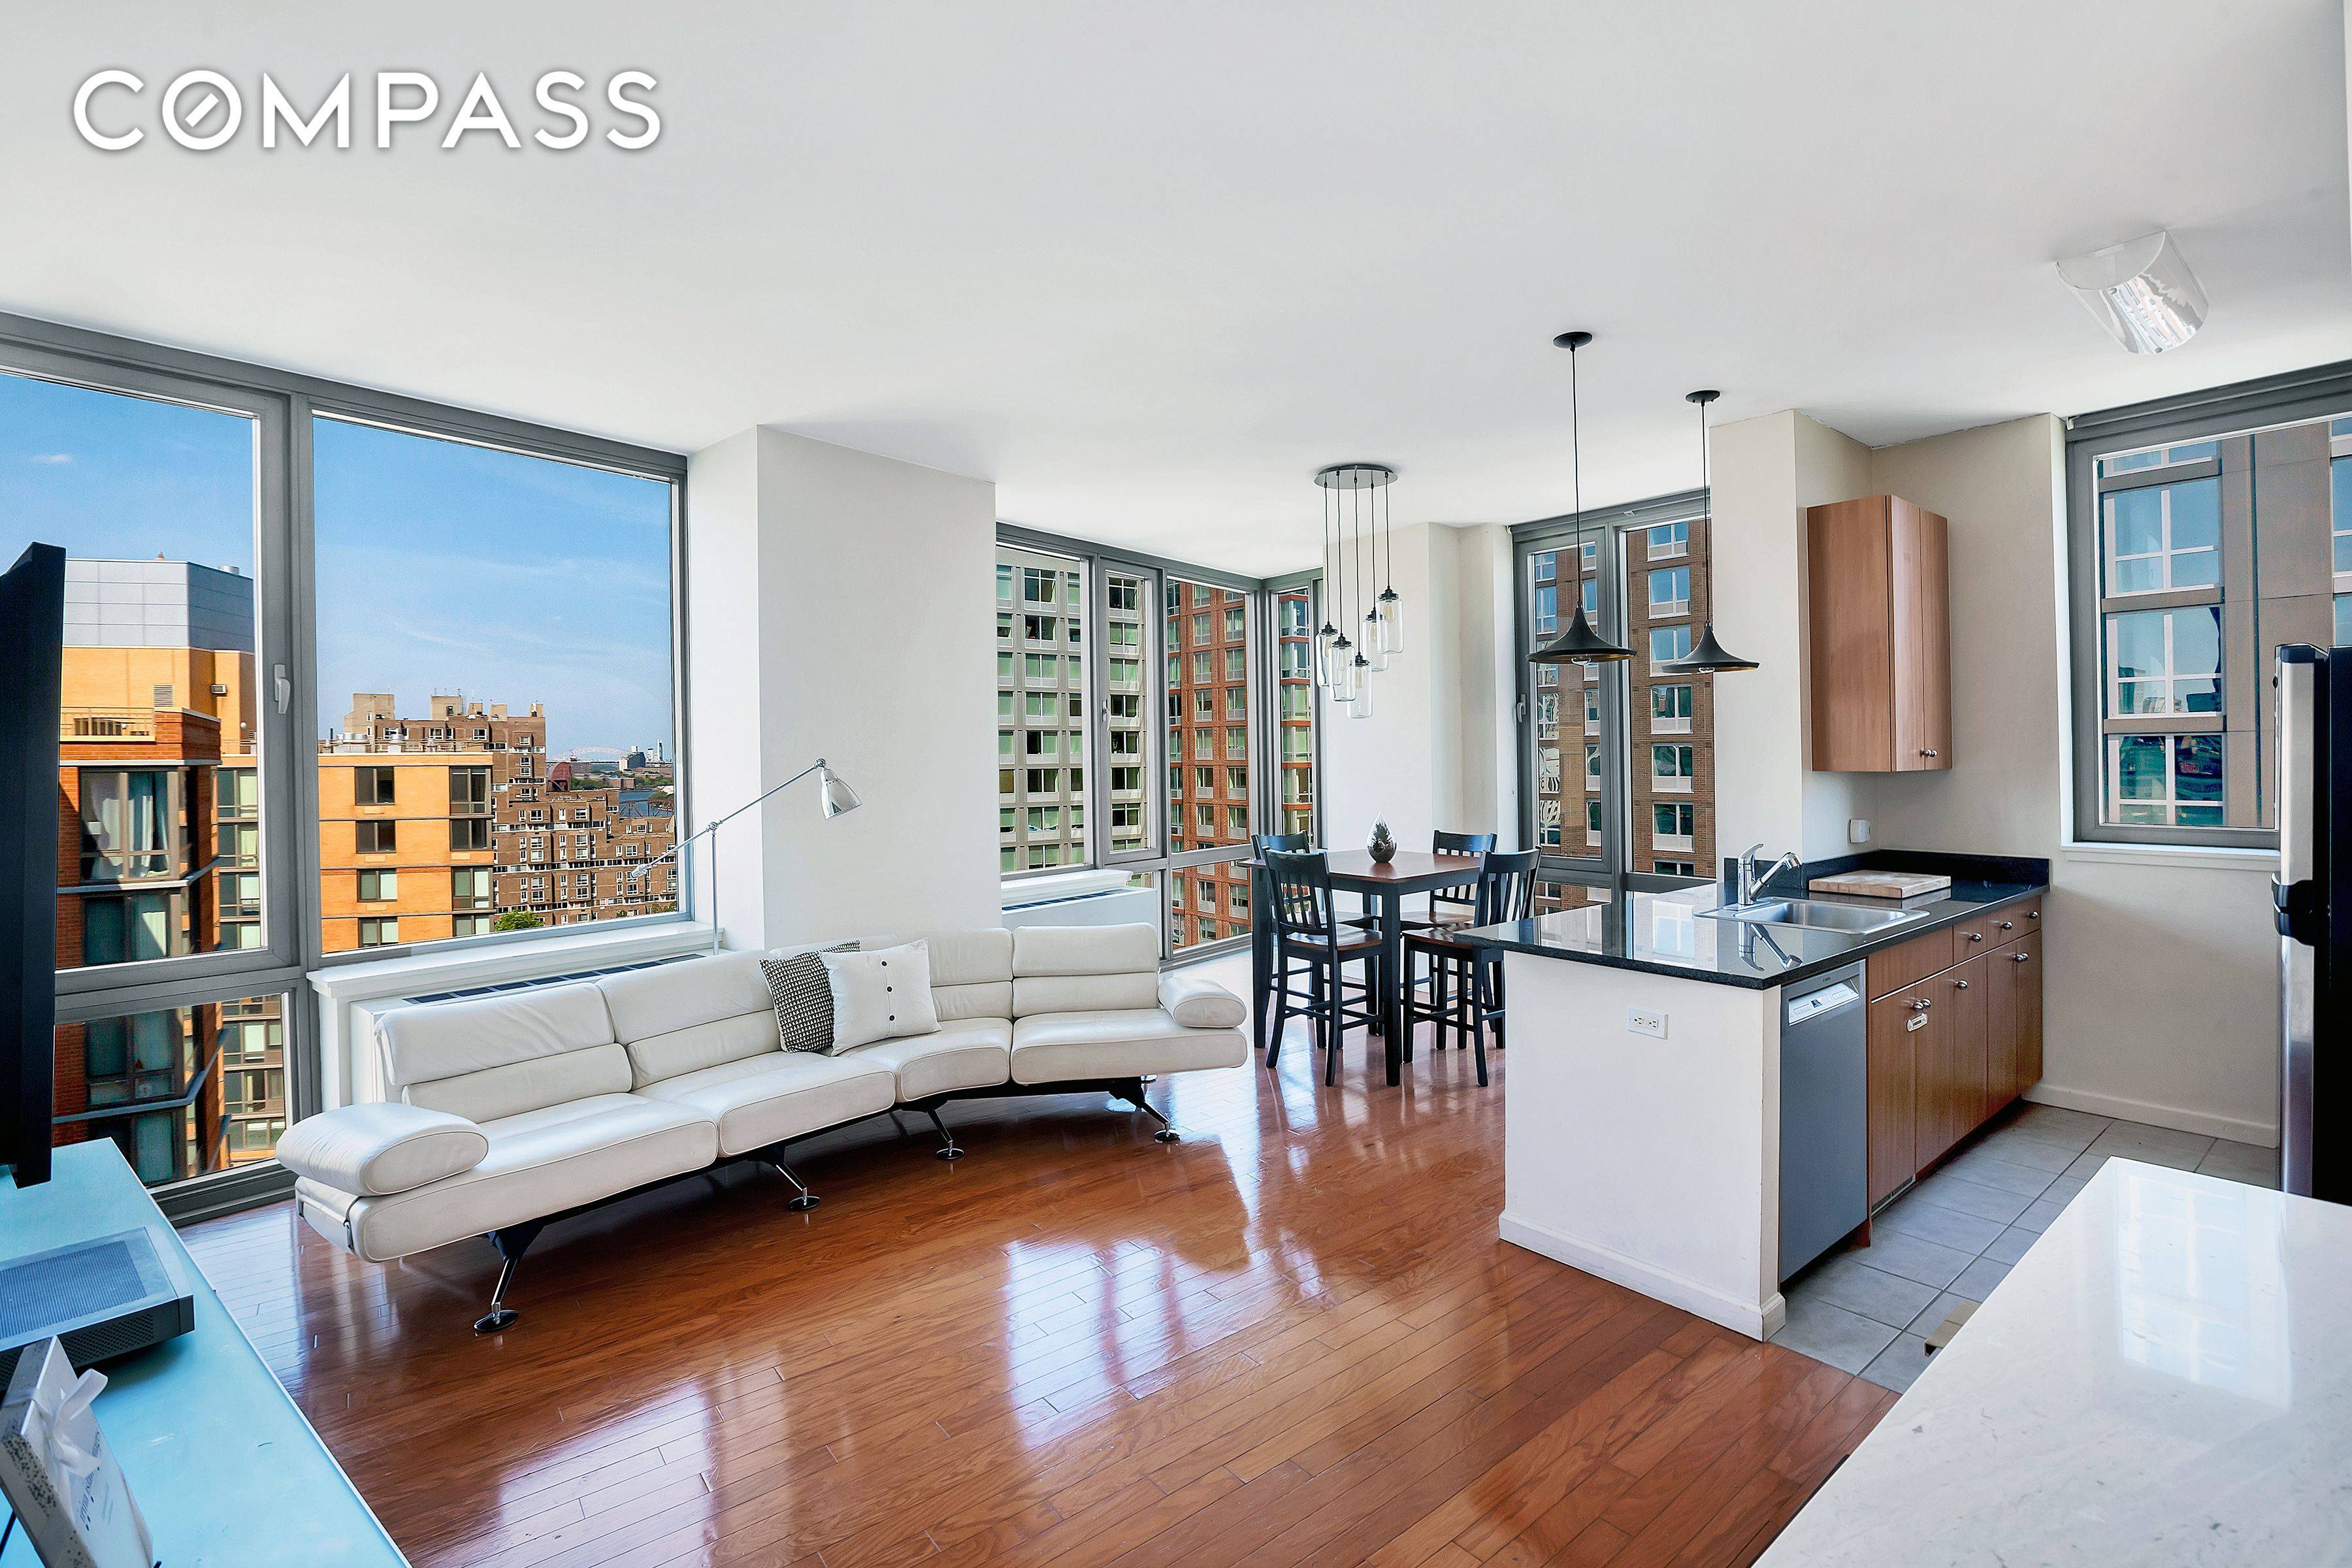 This one of a kind Two Bedroom Two full Baths Penthouse features floor to ceiling windows, open windowed chef's kitchen, granite countertops, marble primary bathroom with a double sink vanity, ...